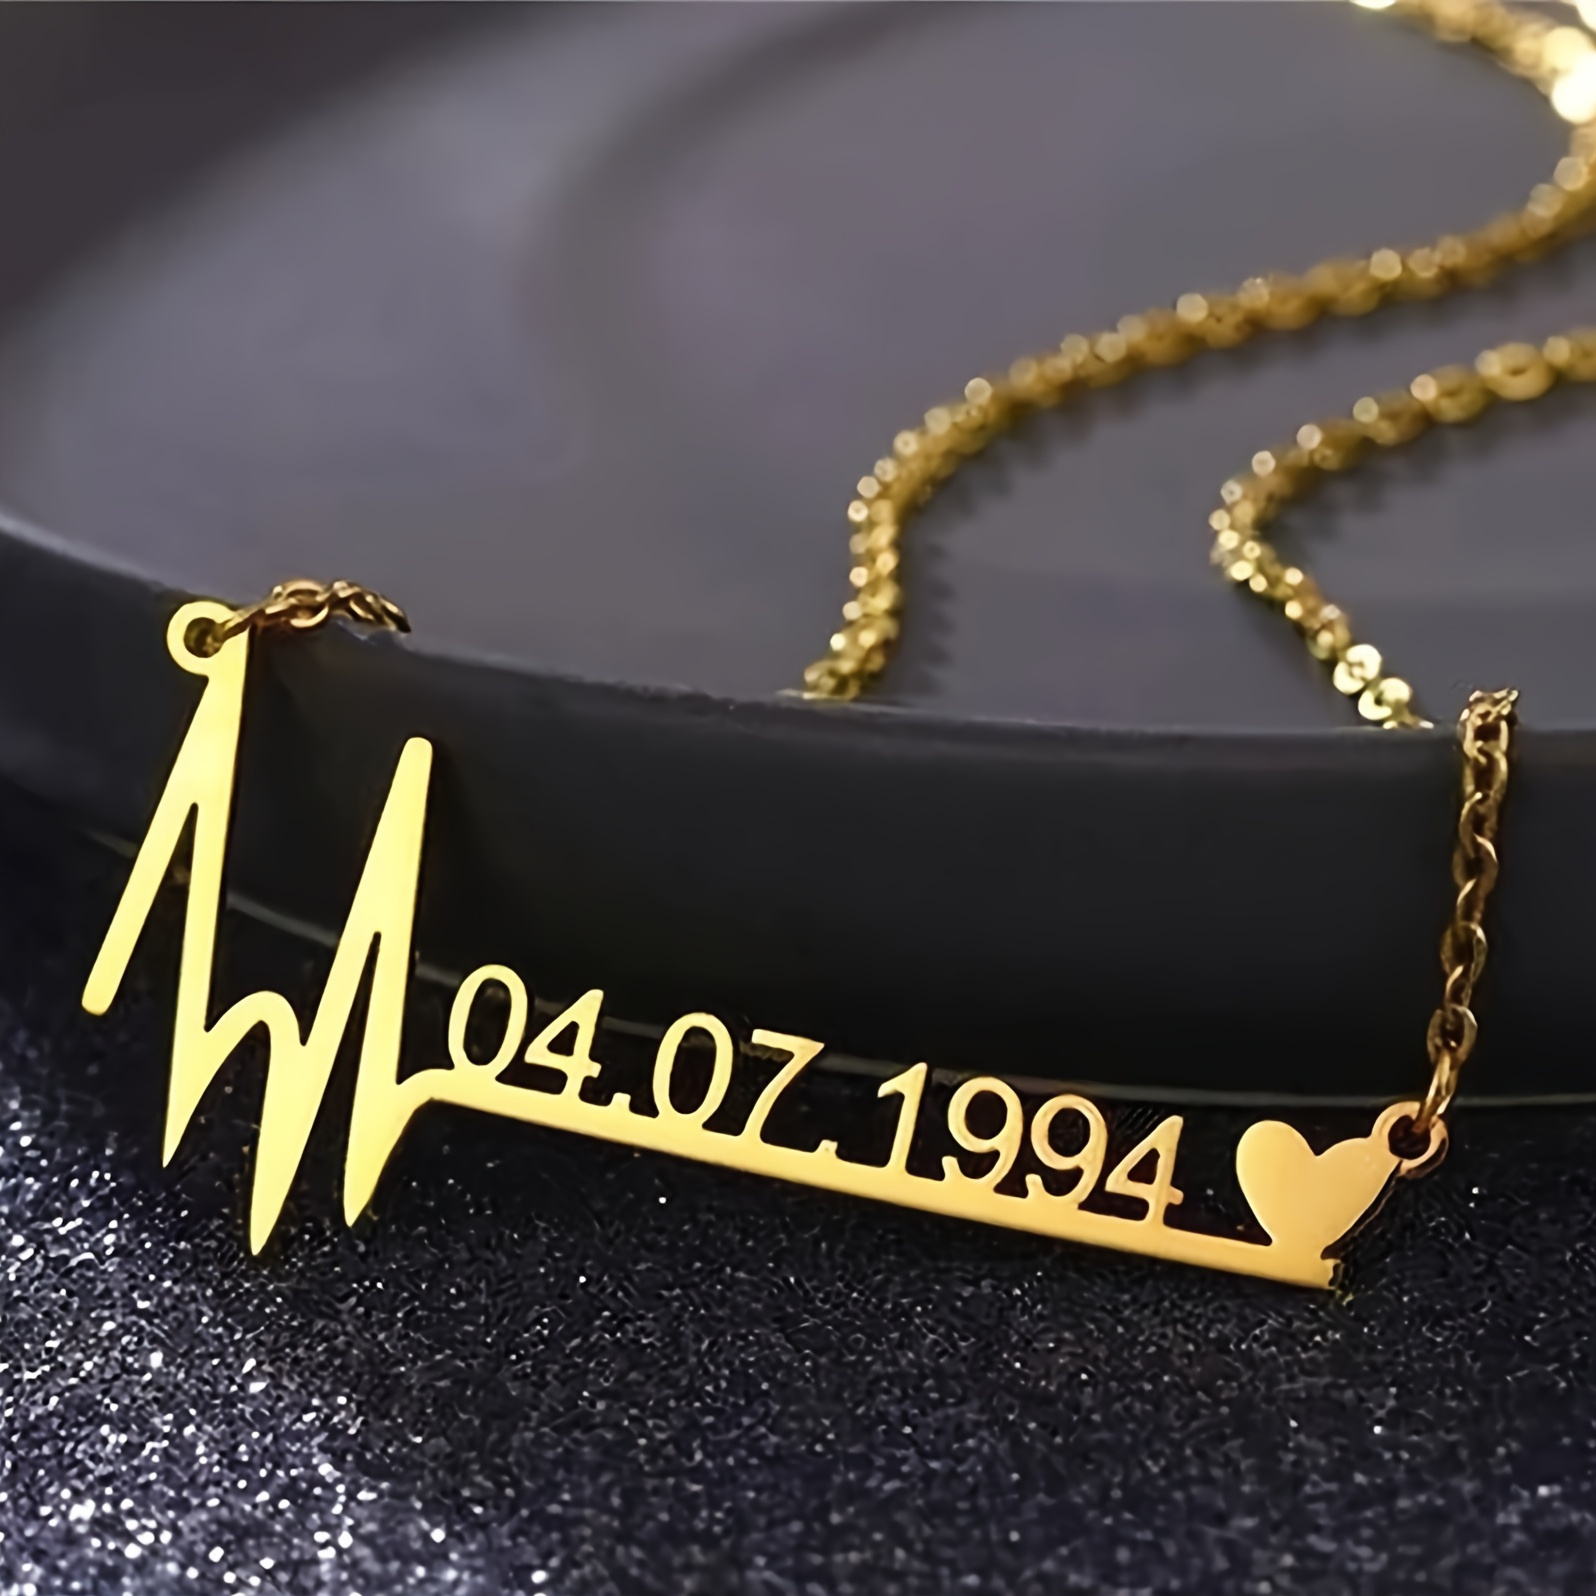 

Ecg Customized Lucky Number Pendant Necklace Personalized Commemorative Date Neck Chain Mother's Day Valentine's Day Gift Birthday Gift